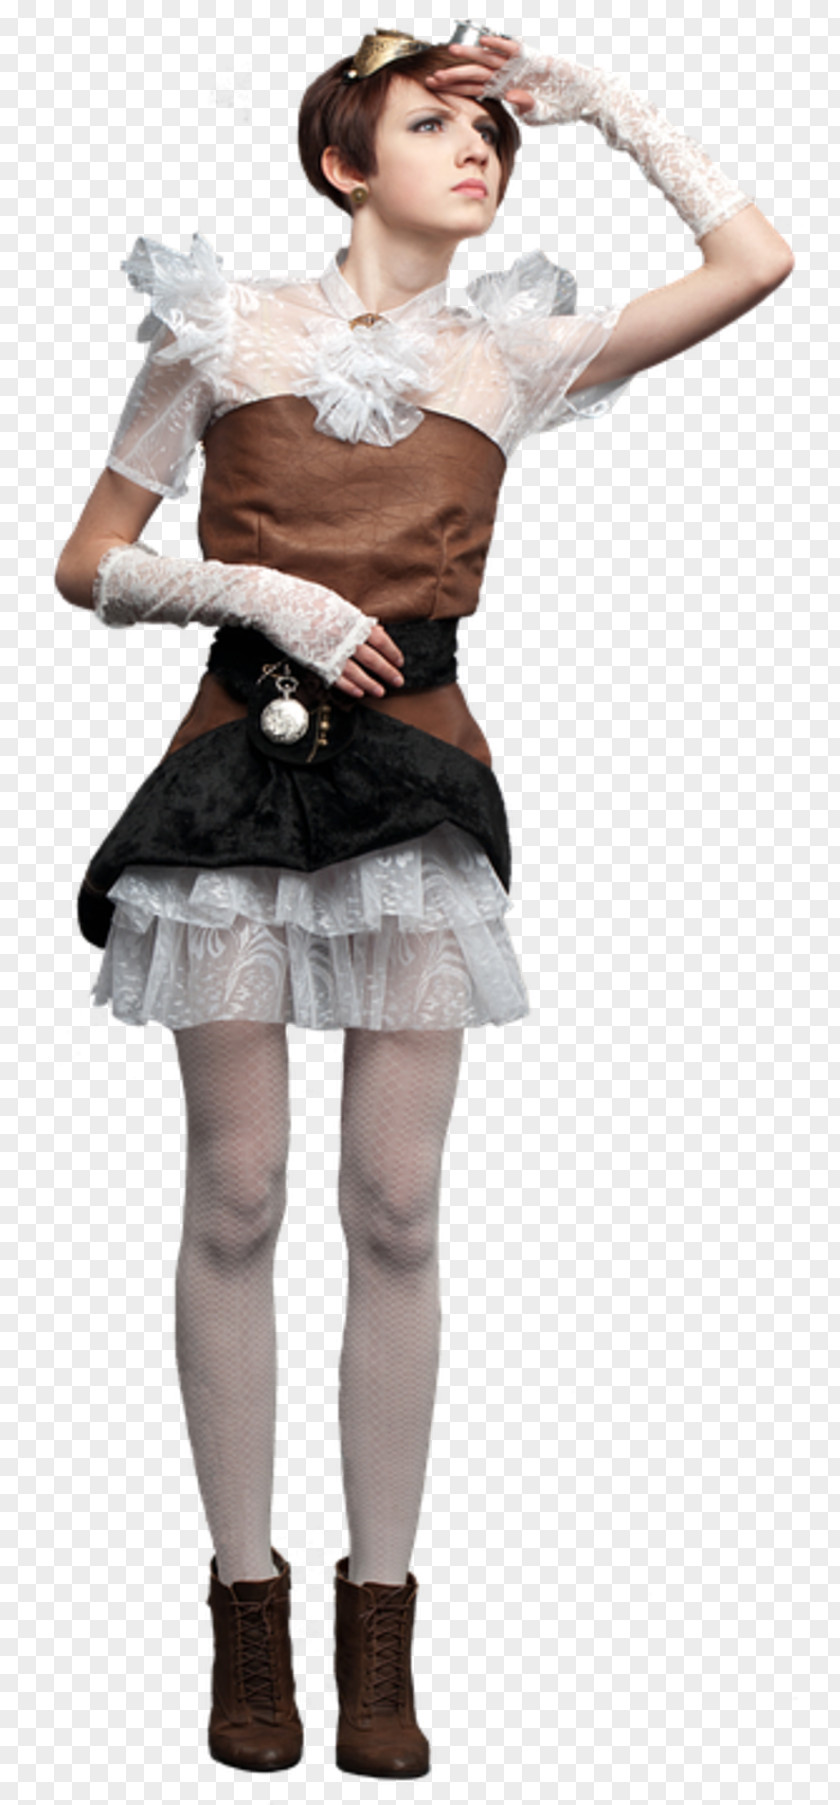 Woman Steampunk Fashion Costume Clothing PNG